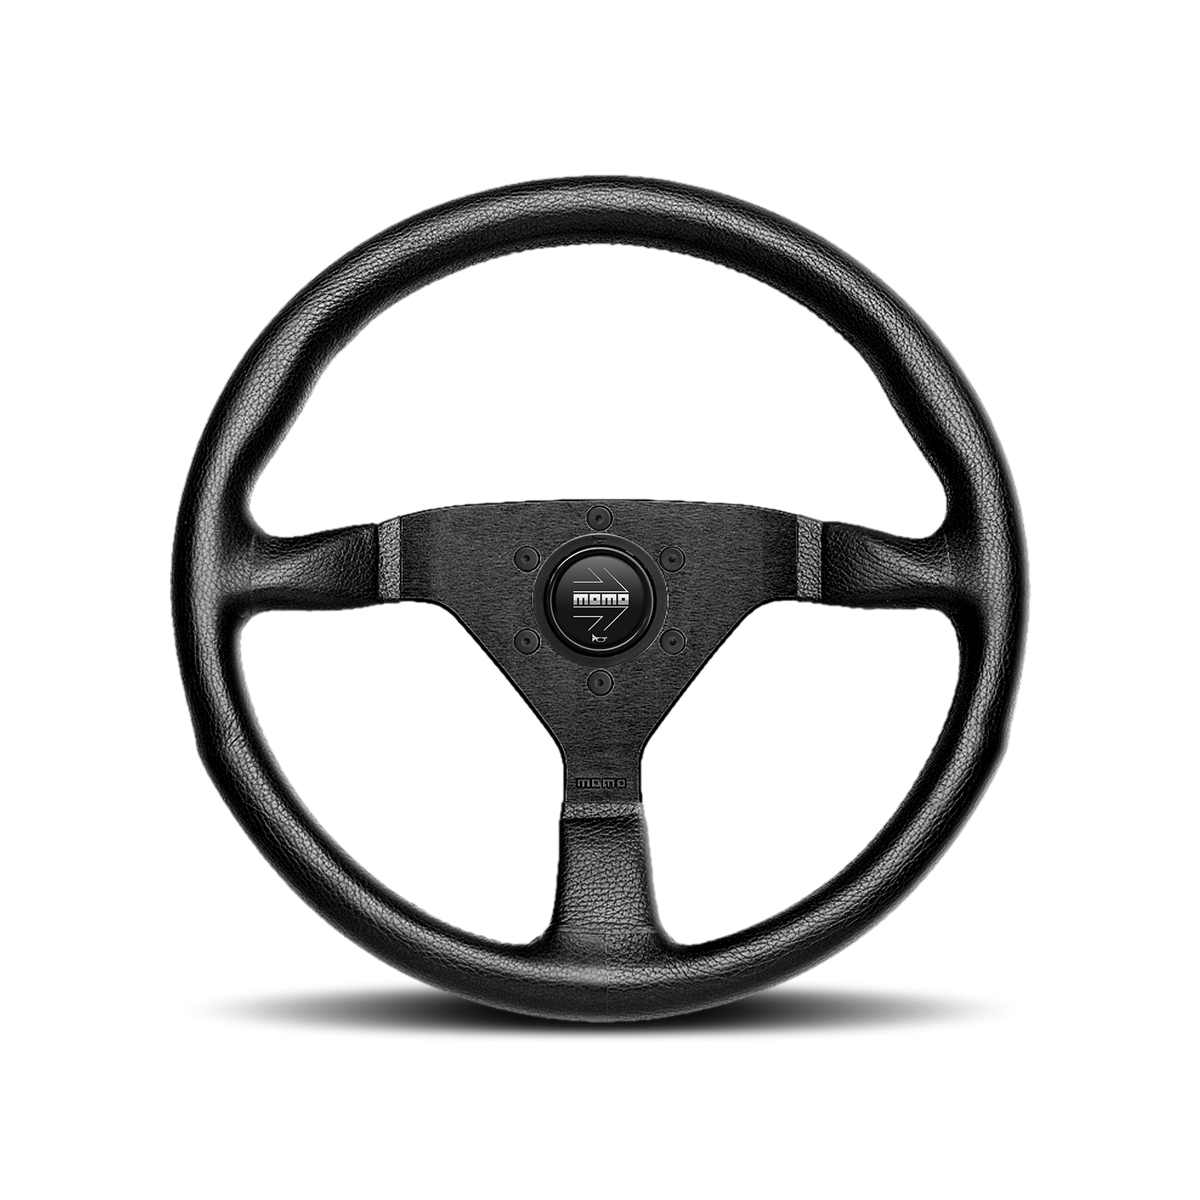 MOMO Montecarlo Steering Wheel 350 mm - Black Leather/Black Stitch/Brushed Black Anodized Spokes - Dirty Racing Products